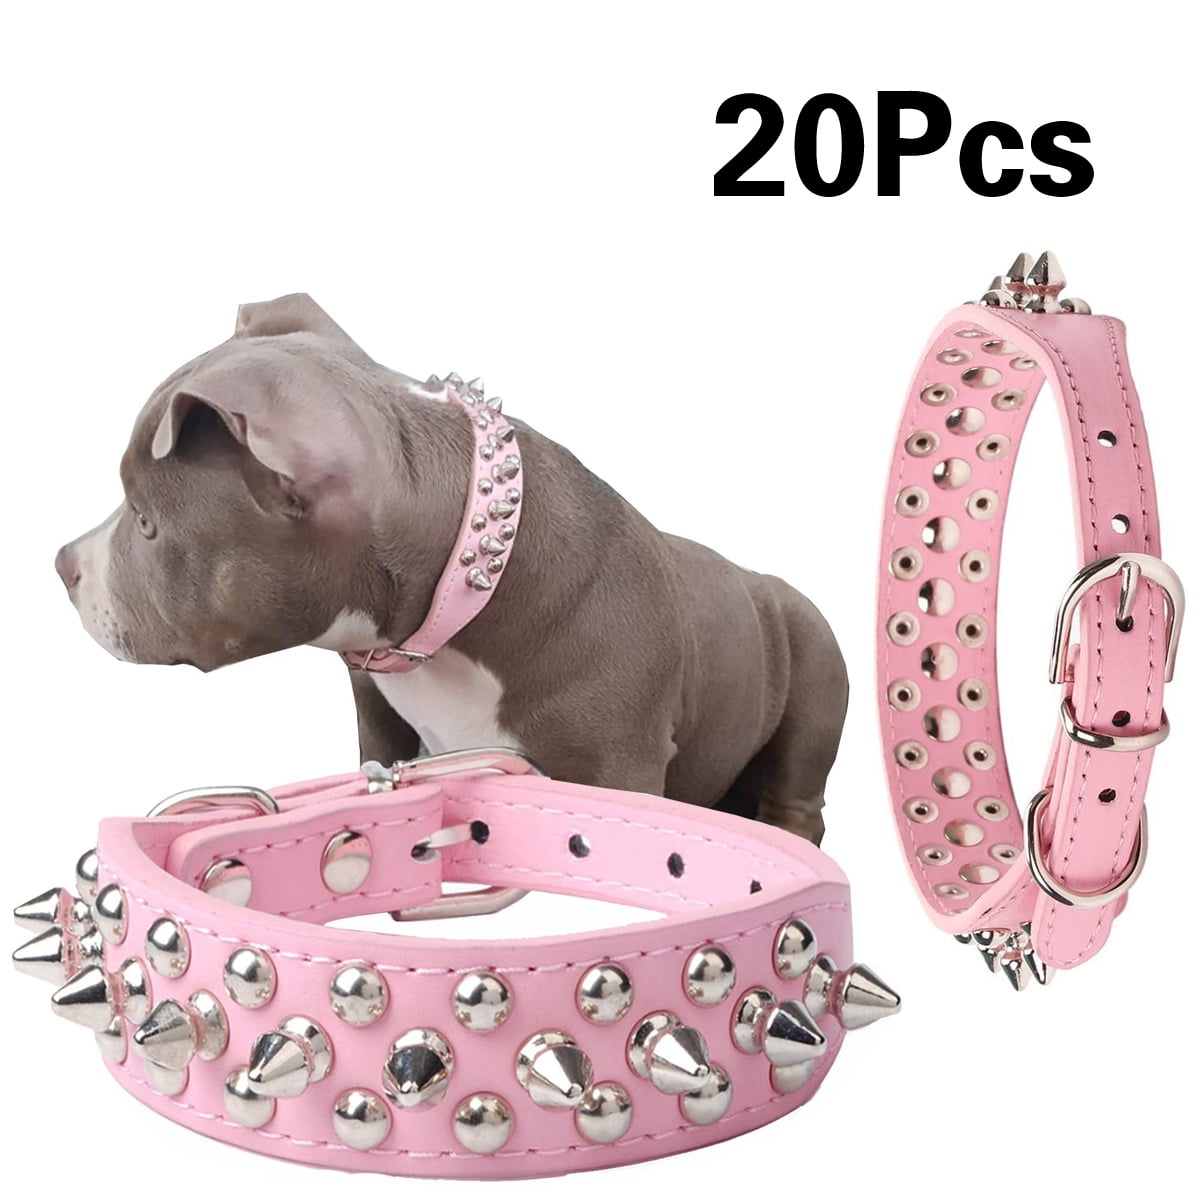 Cool Pet Collars,20 Pcs Soft Faux Leather Spiked Dog Collar with Rivets and  Studs Puppy Collars Adjustable for Small Medium Large Dogs for Pet Big